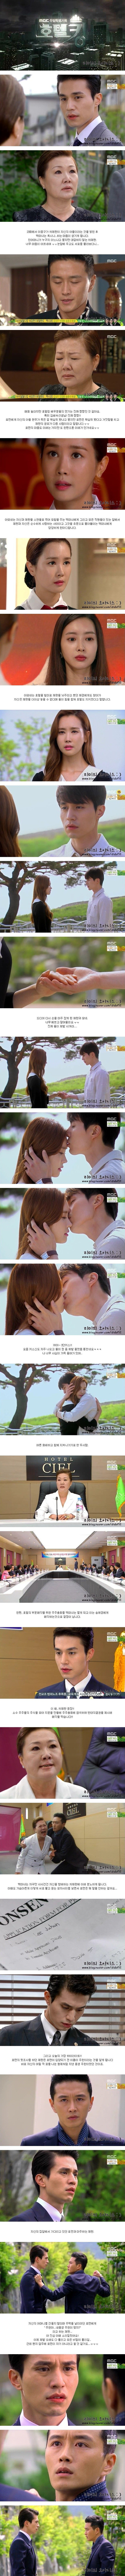 episodes 23 and 24 captures for the Korean drama 'Hotel King'